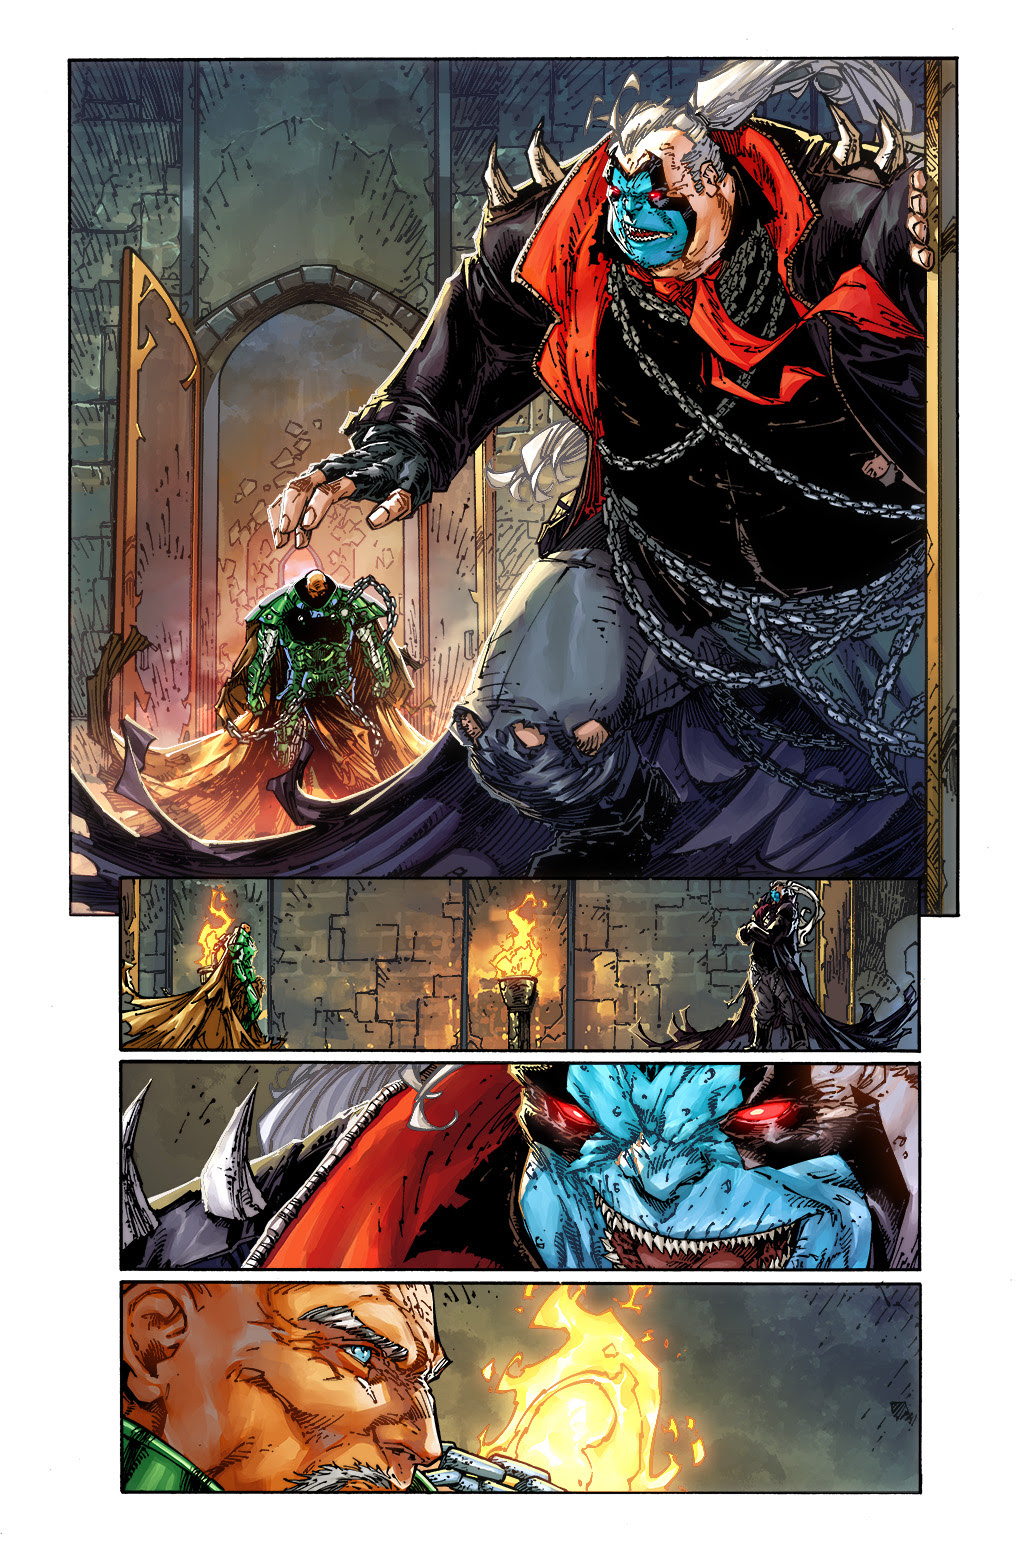 Art from Spawn #350